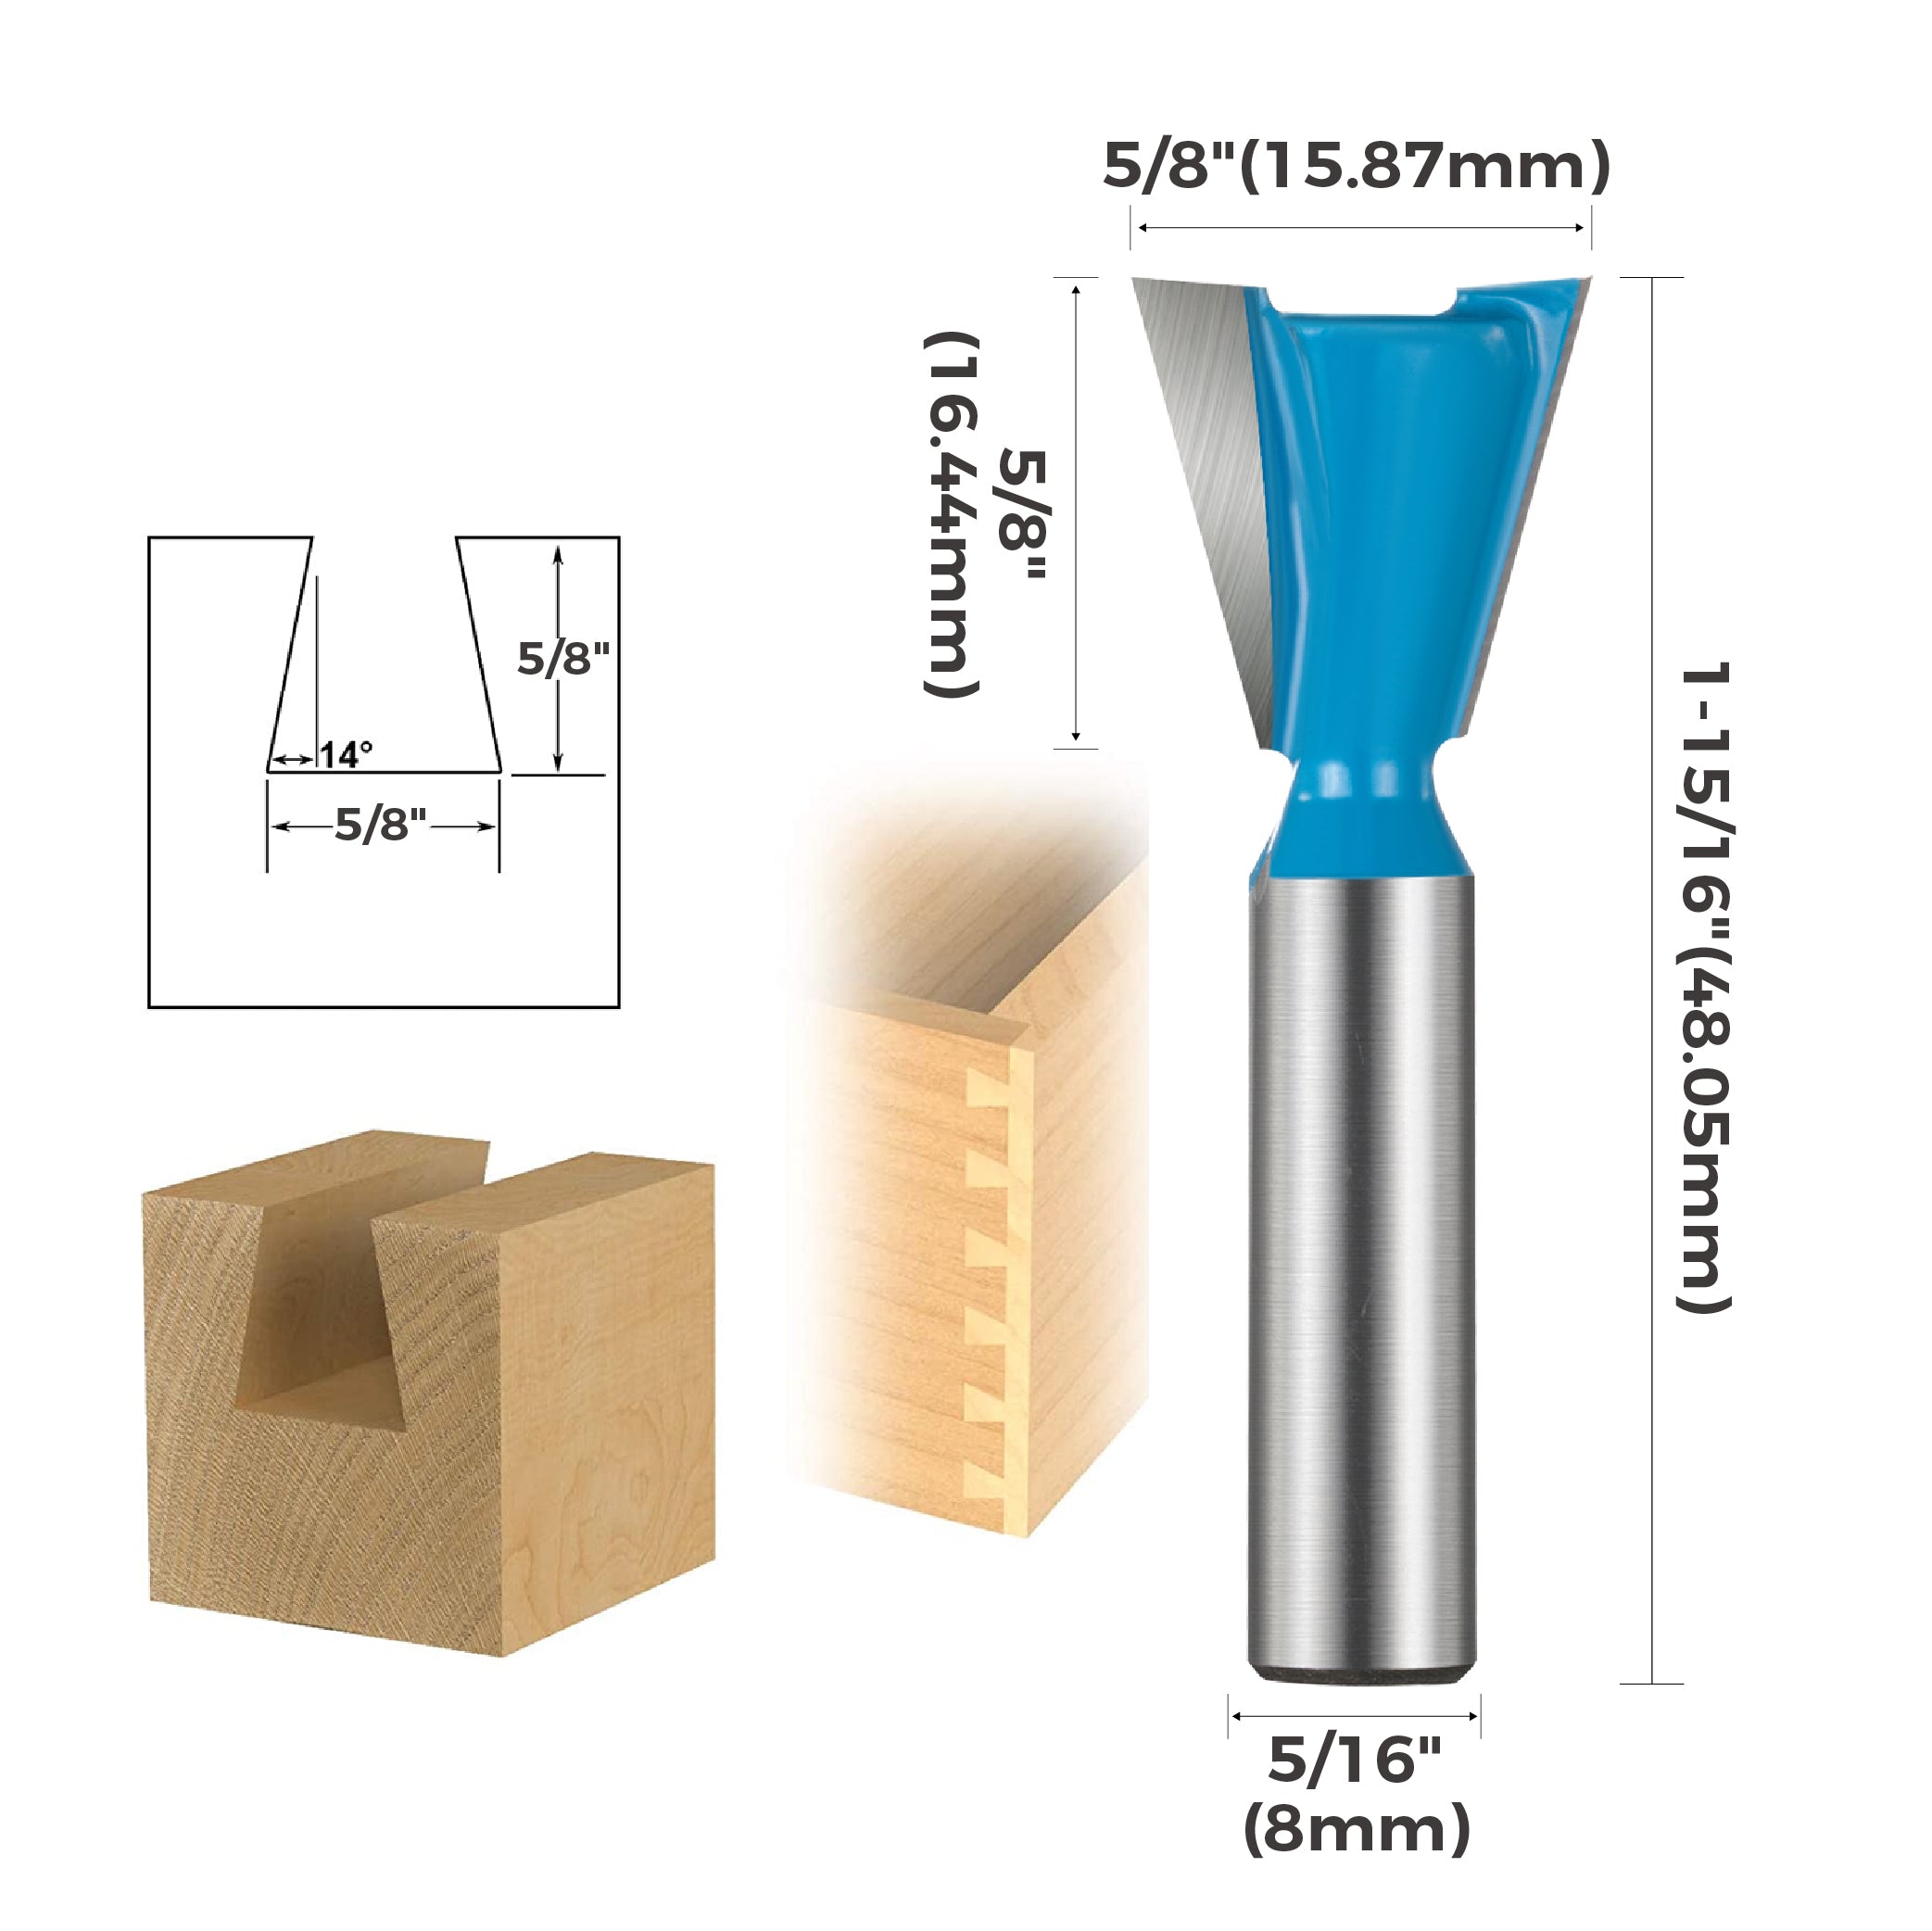 toolant Dovetail Router Bits , 5/16-Inch Shank 14 Degree 5/8-Inch, Carbide-Tipped Milling Cutter for Woodworking